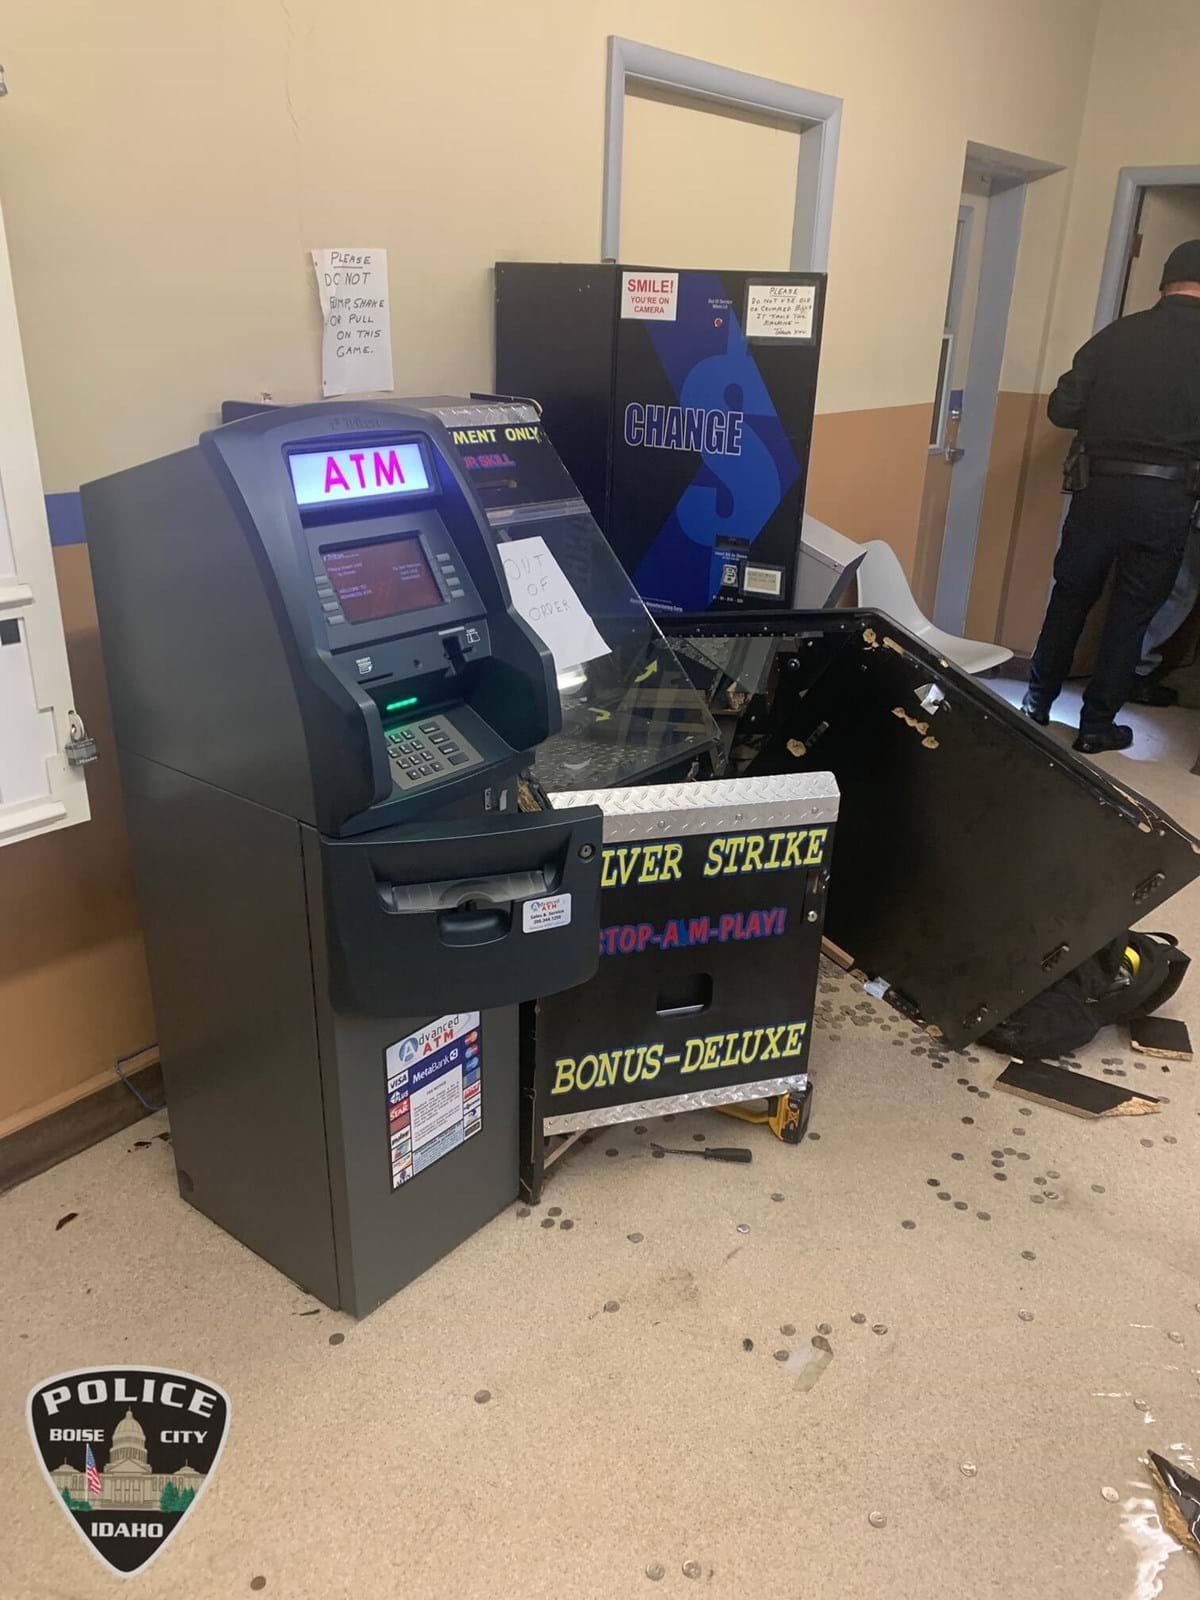 Damaged ATM and Change machines